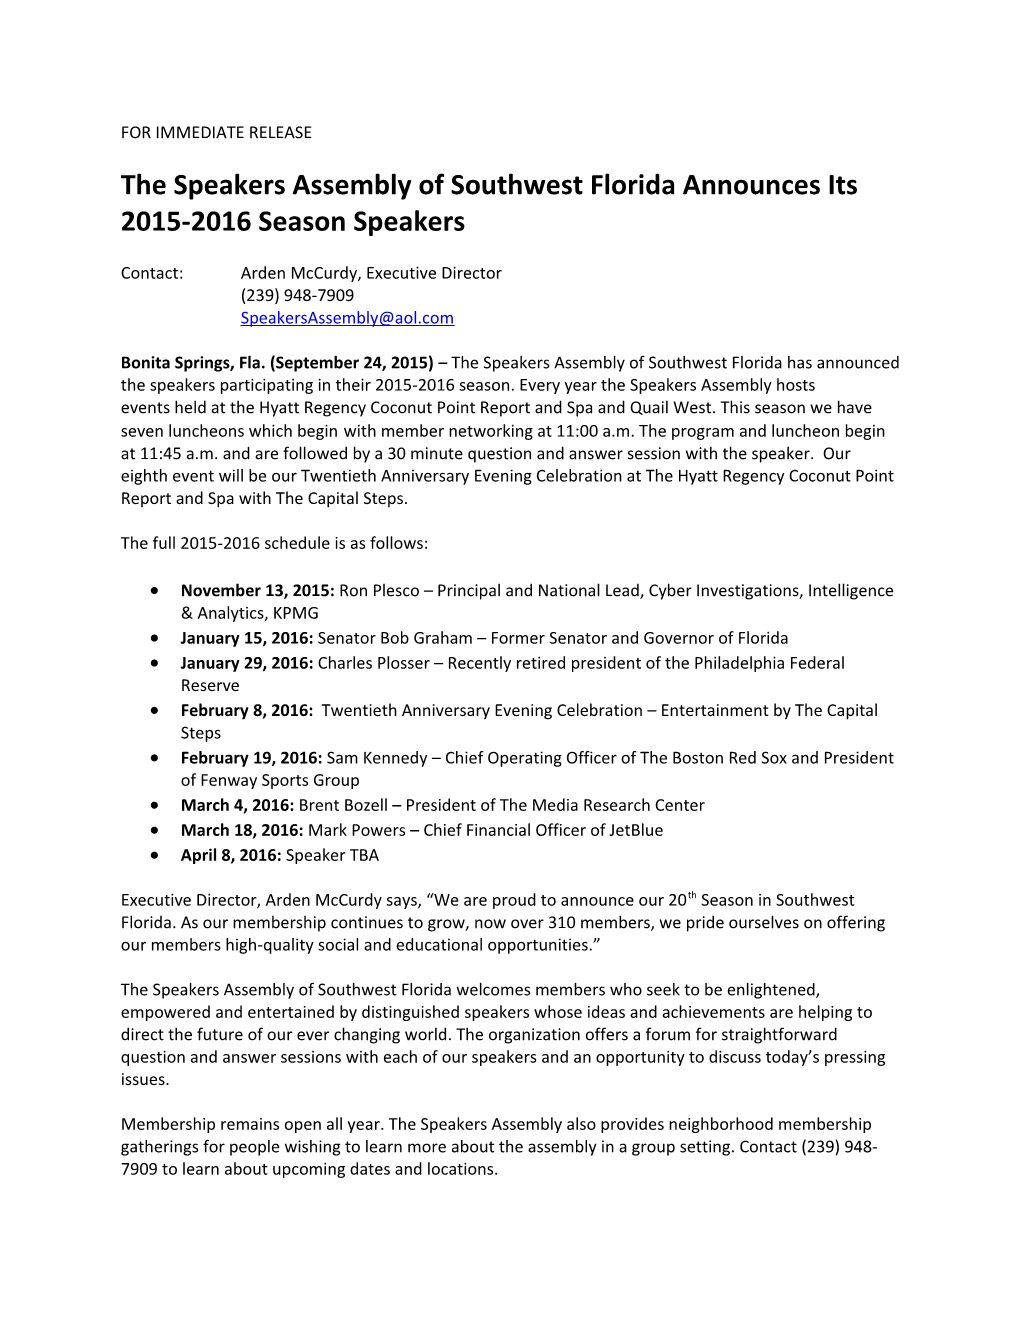 The Speakers Assembly of Southwest Florida Announces Its 2015-2016 Season Speakers